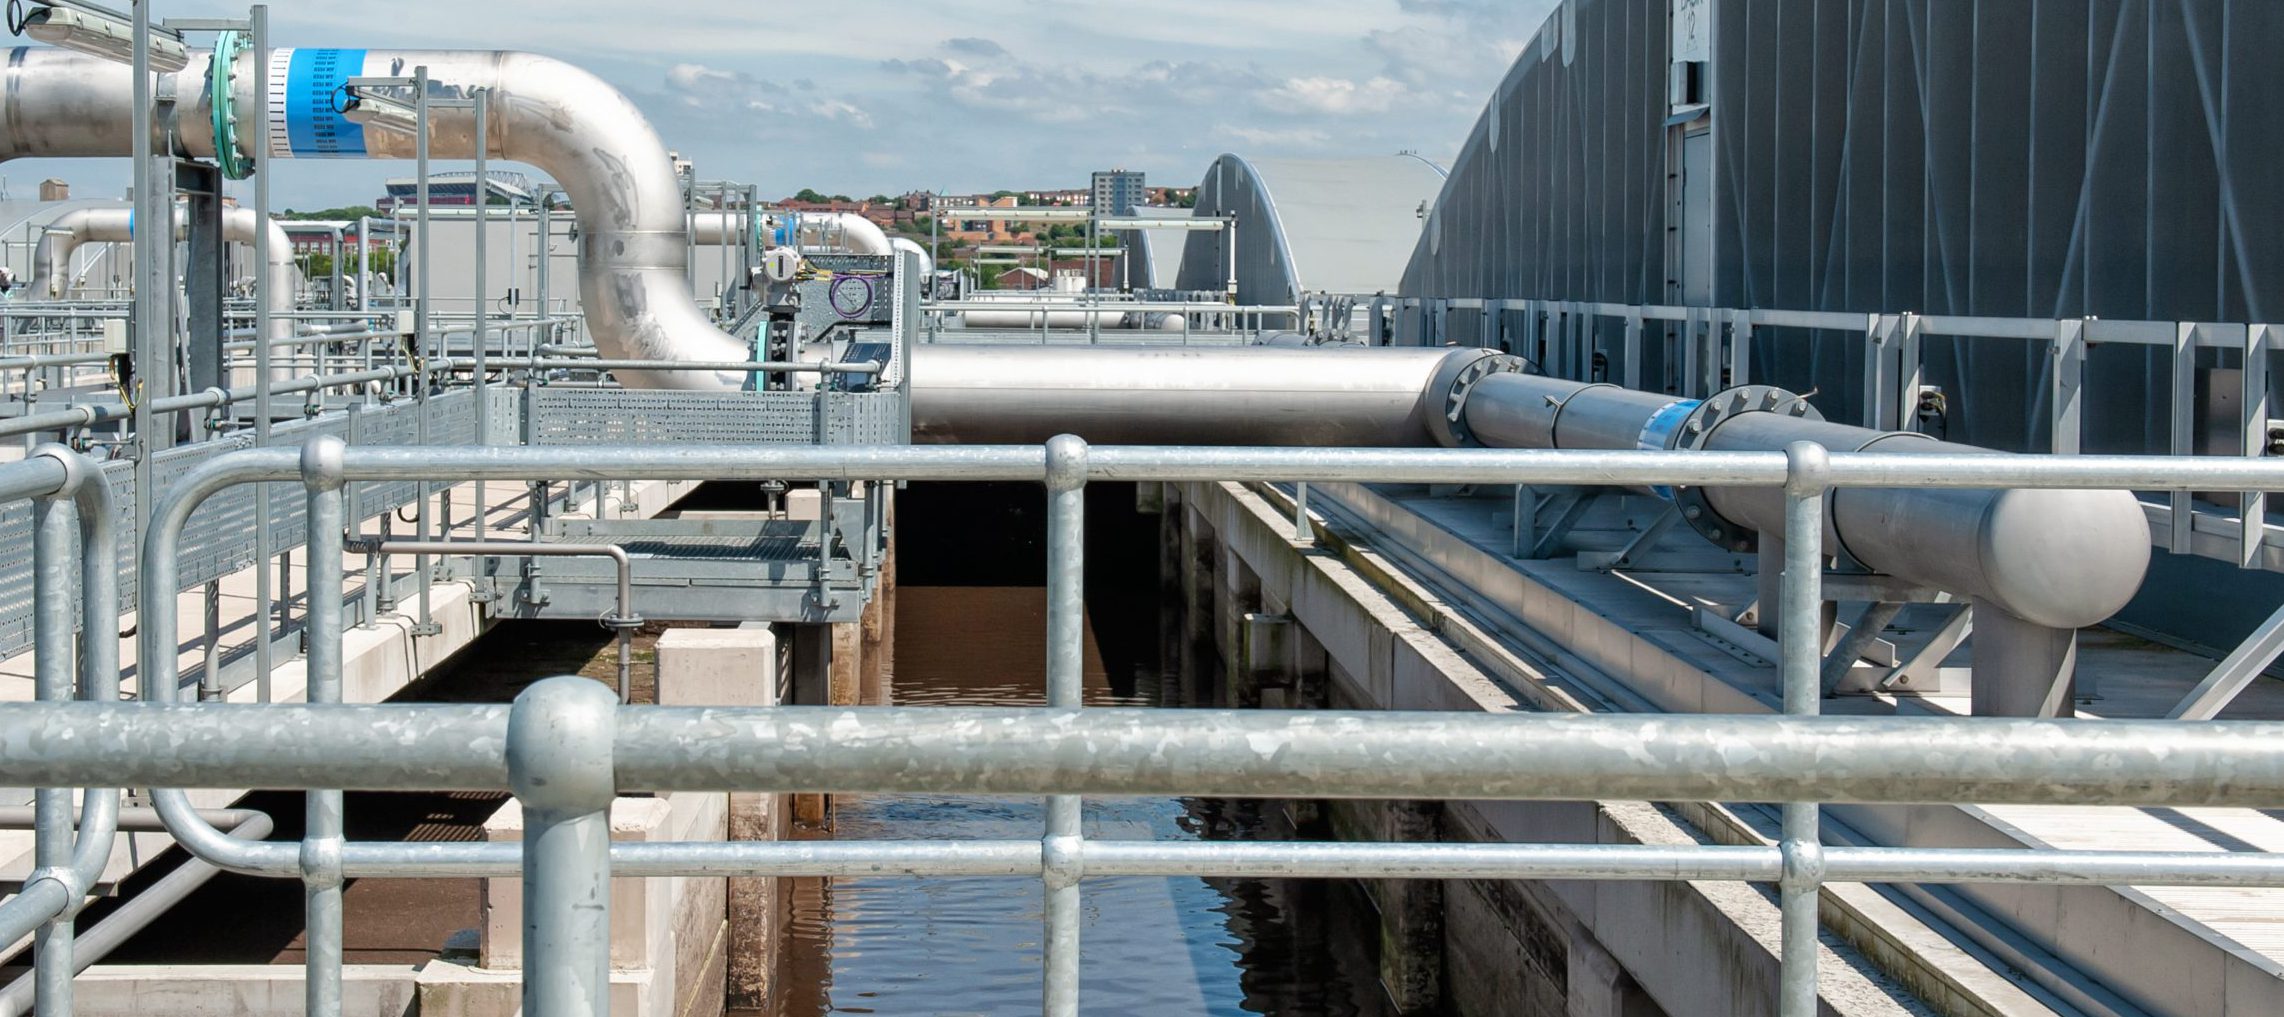 United Utilities uses SmartWaste improve its environmental reporting